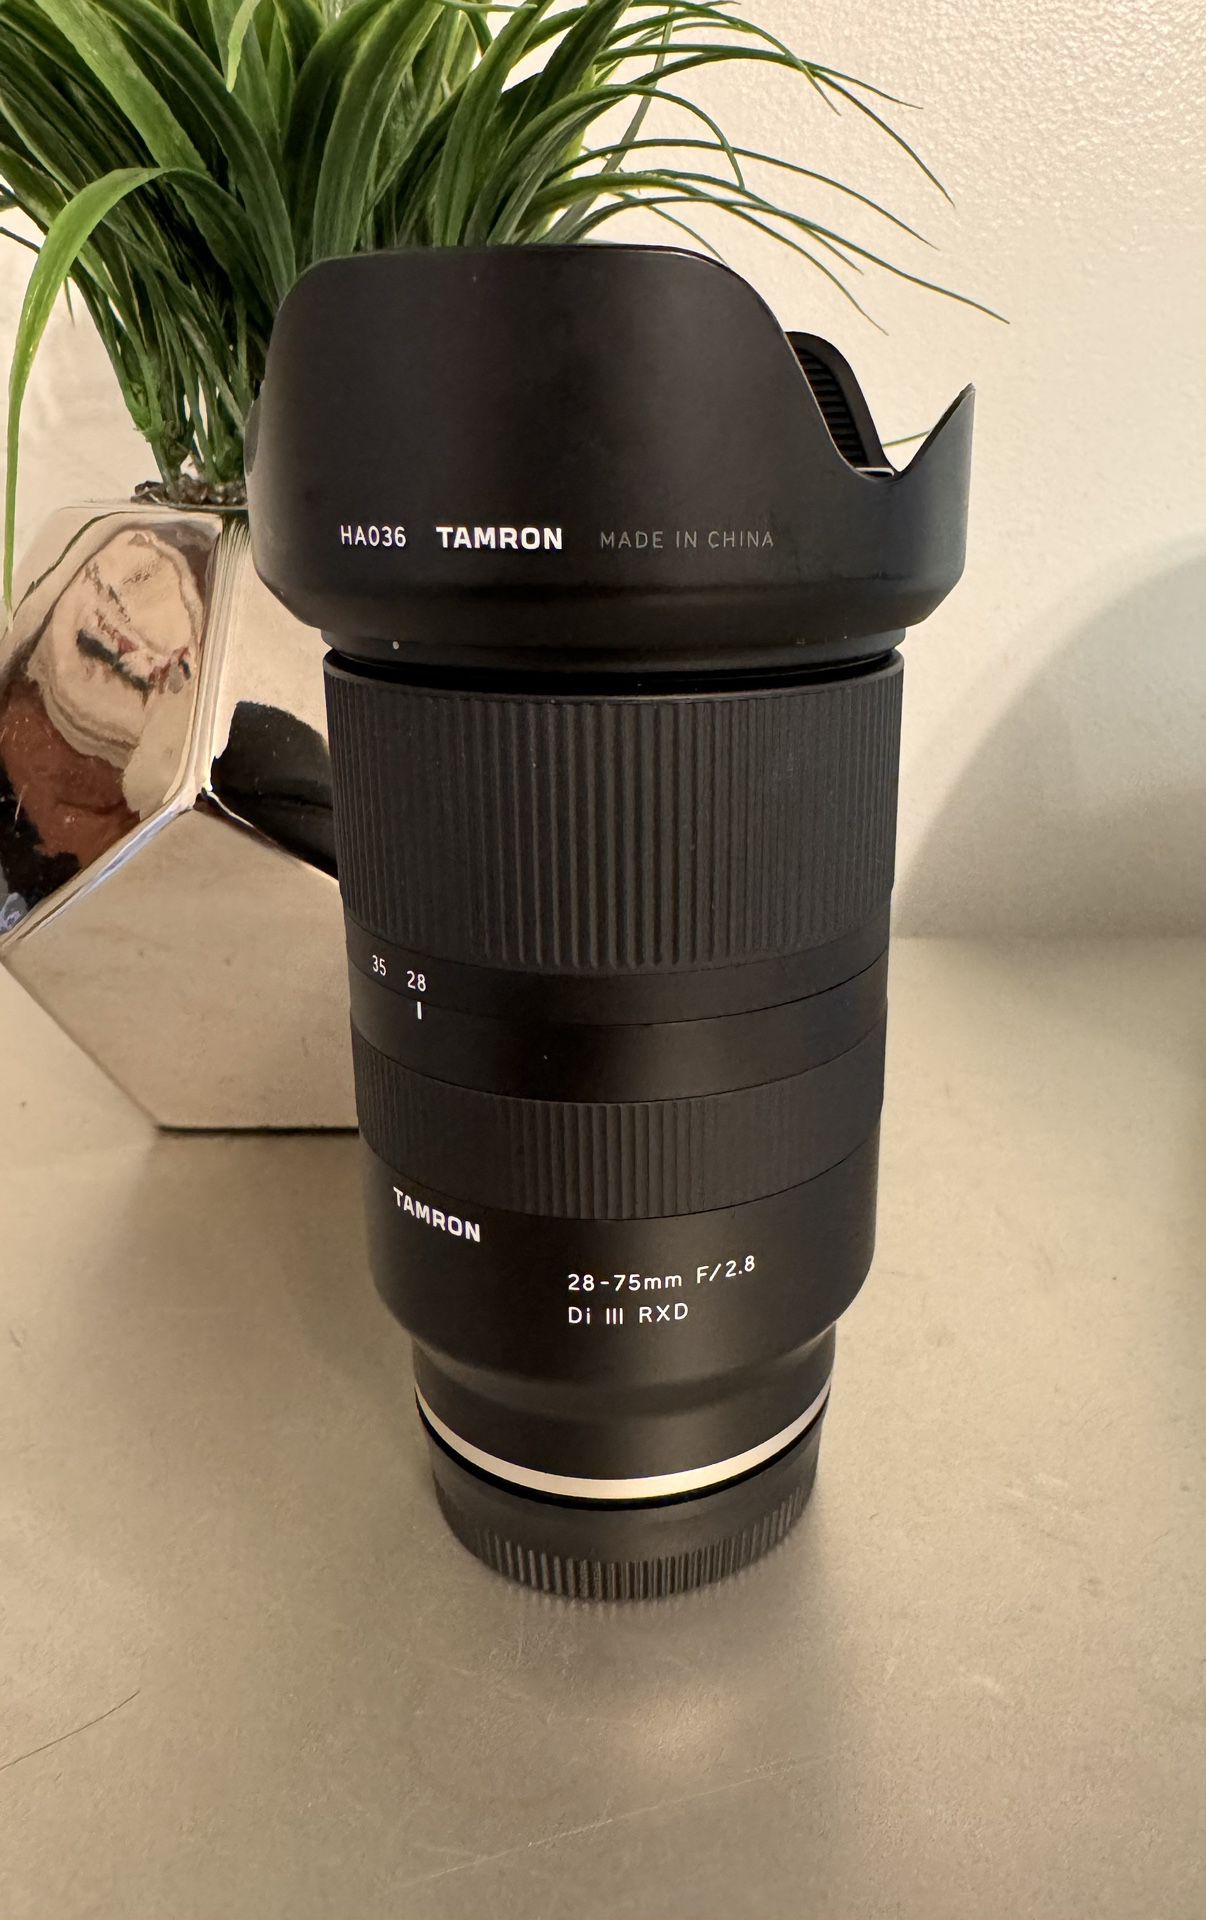 Tamron 28-75mm F/2.8 Di III RXD for SONY full frame E-mount